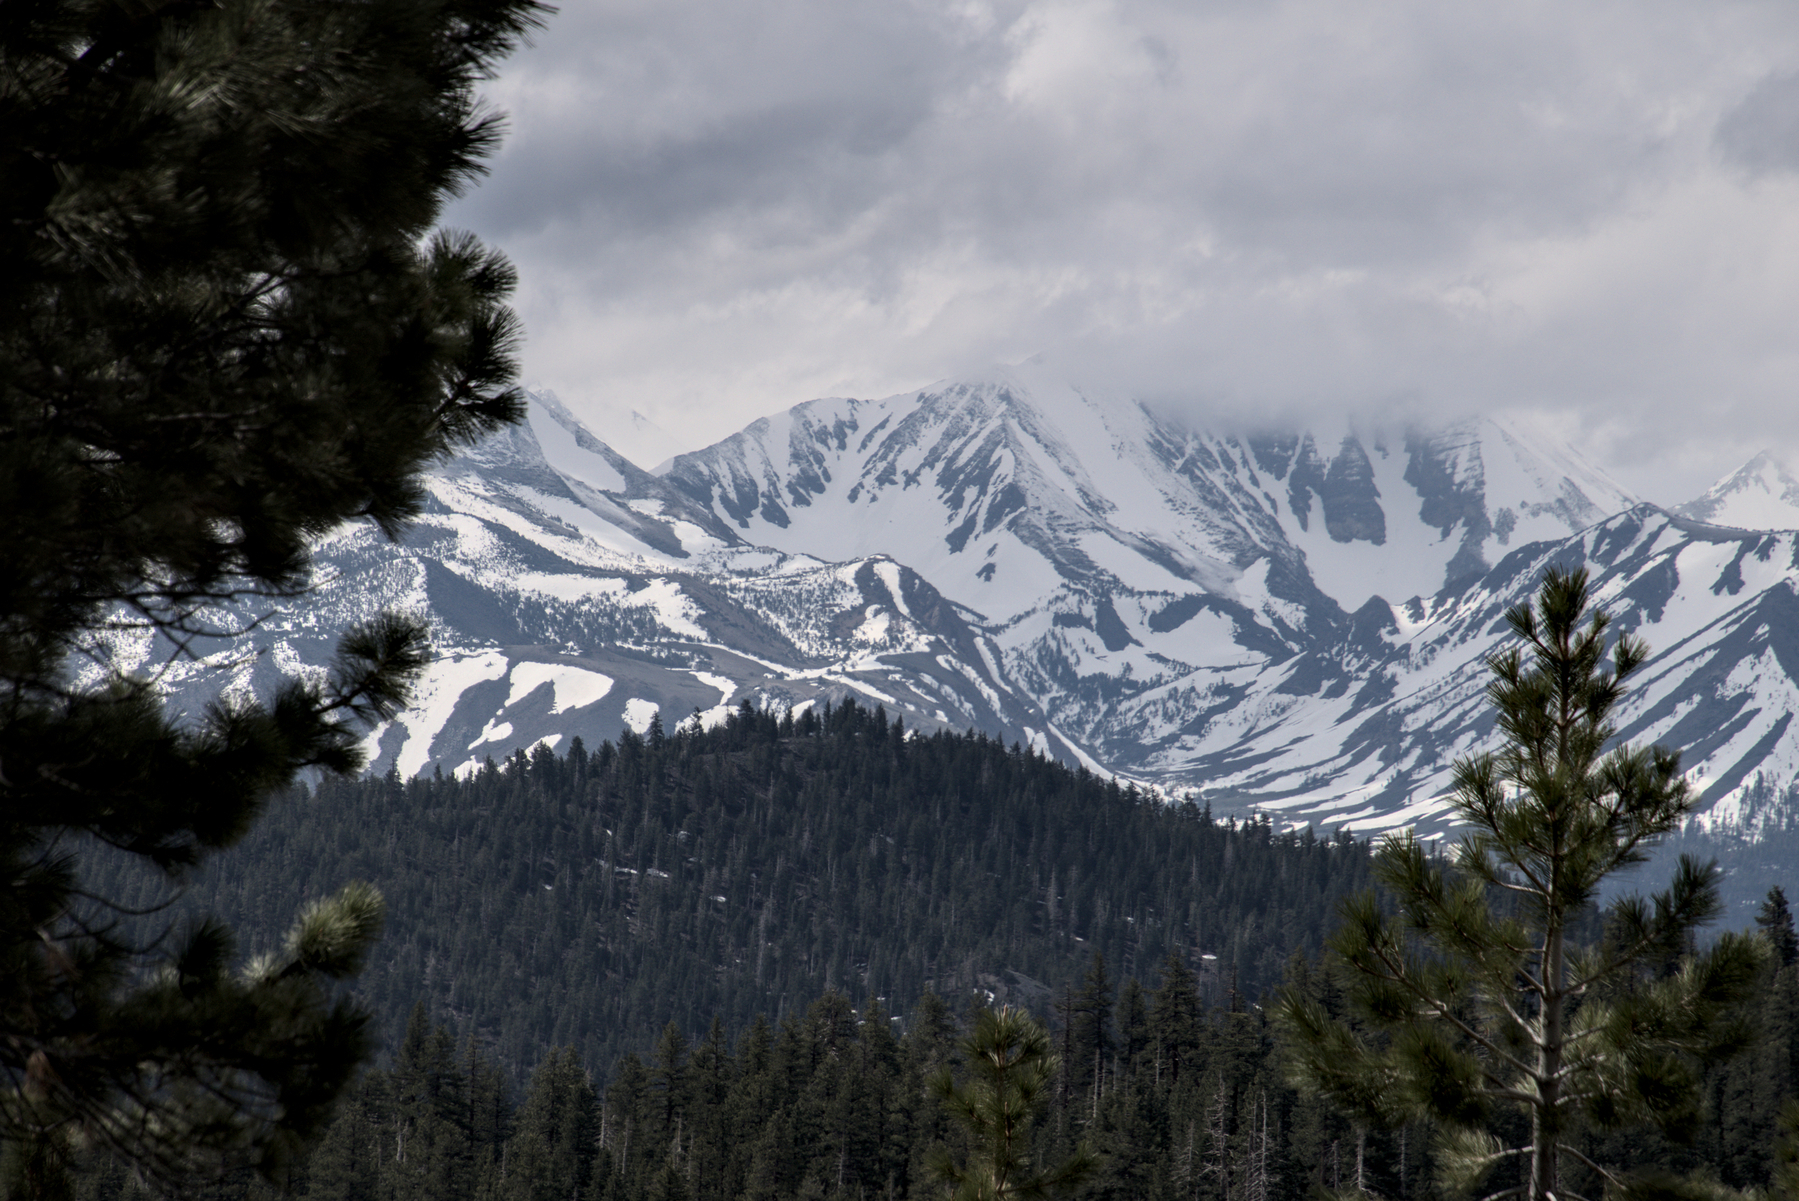 Highm mountain peaks, half covered in snow, shrouded by clouds, with pine covered foothills.